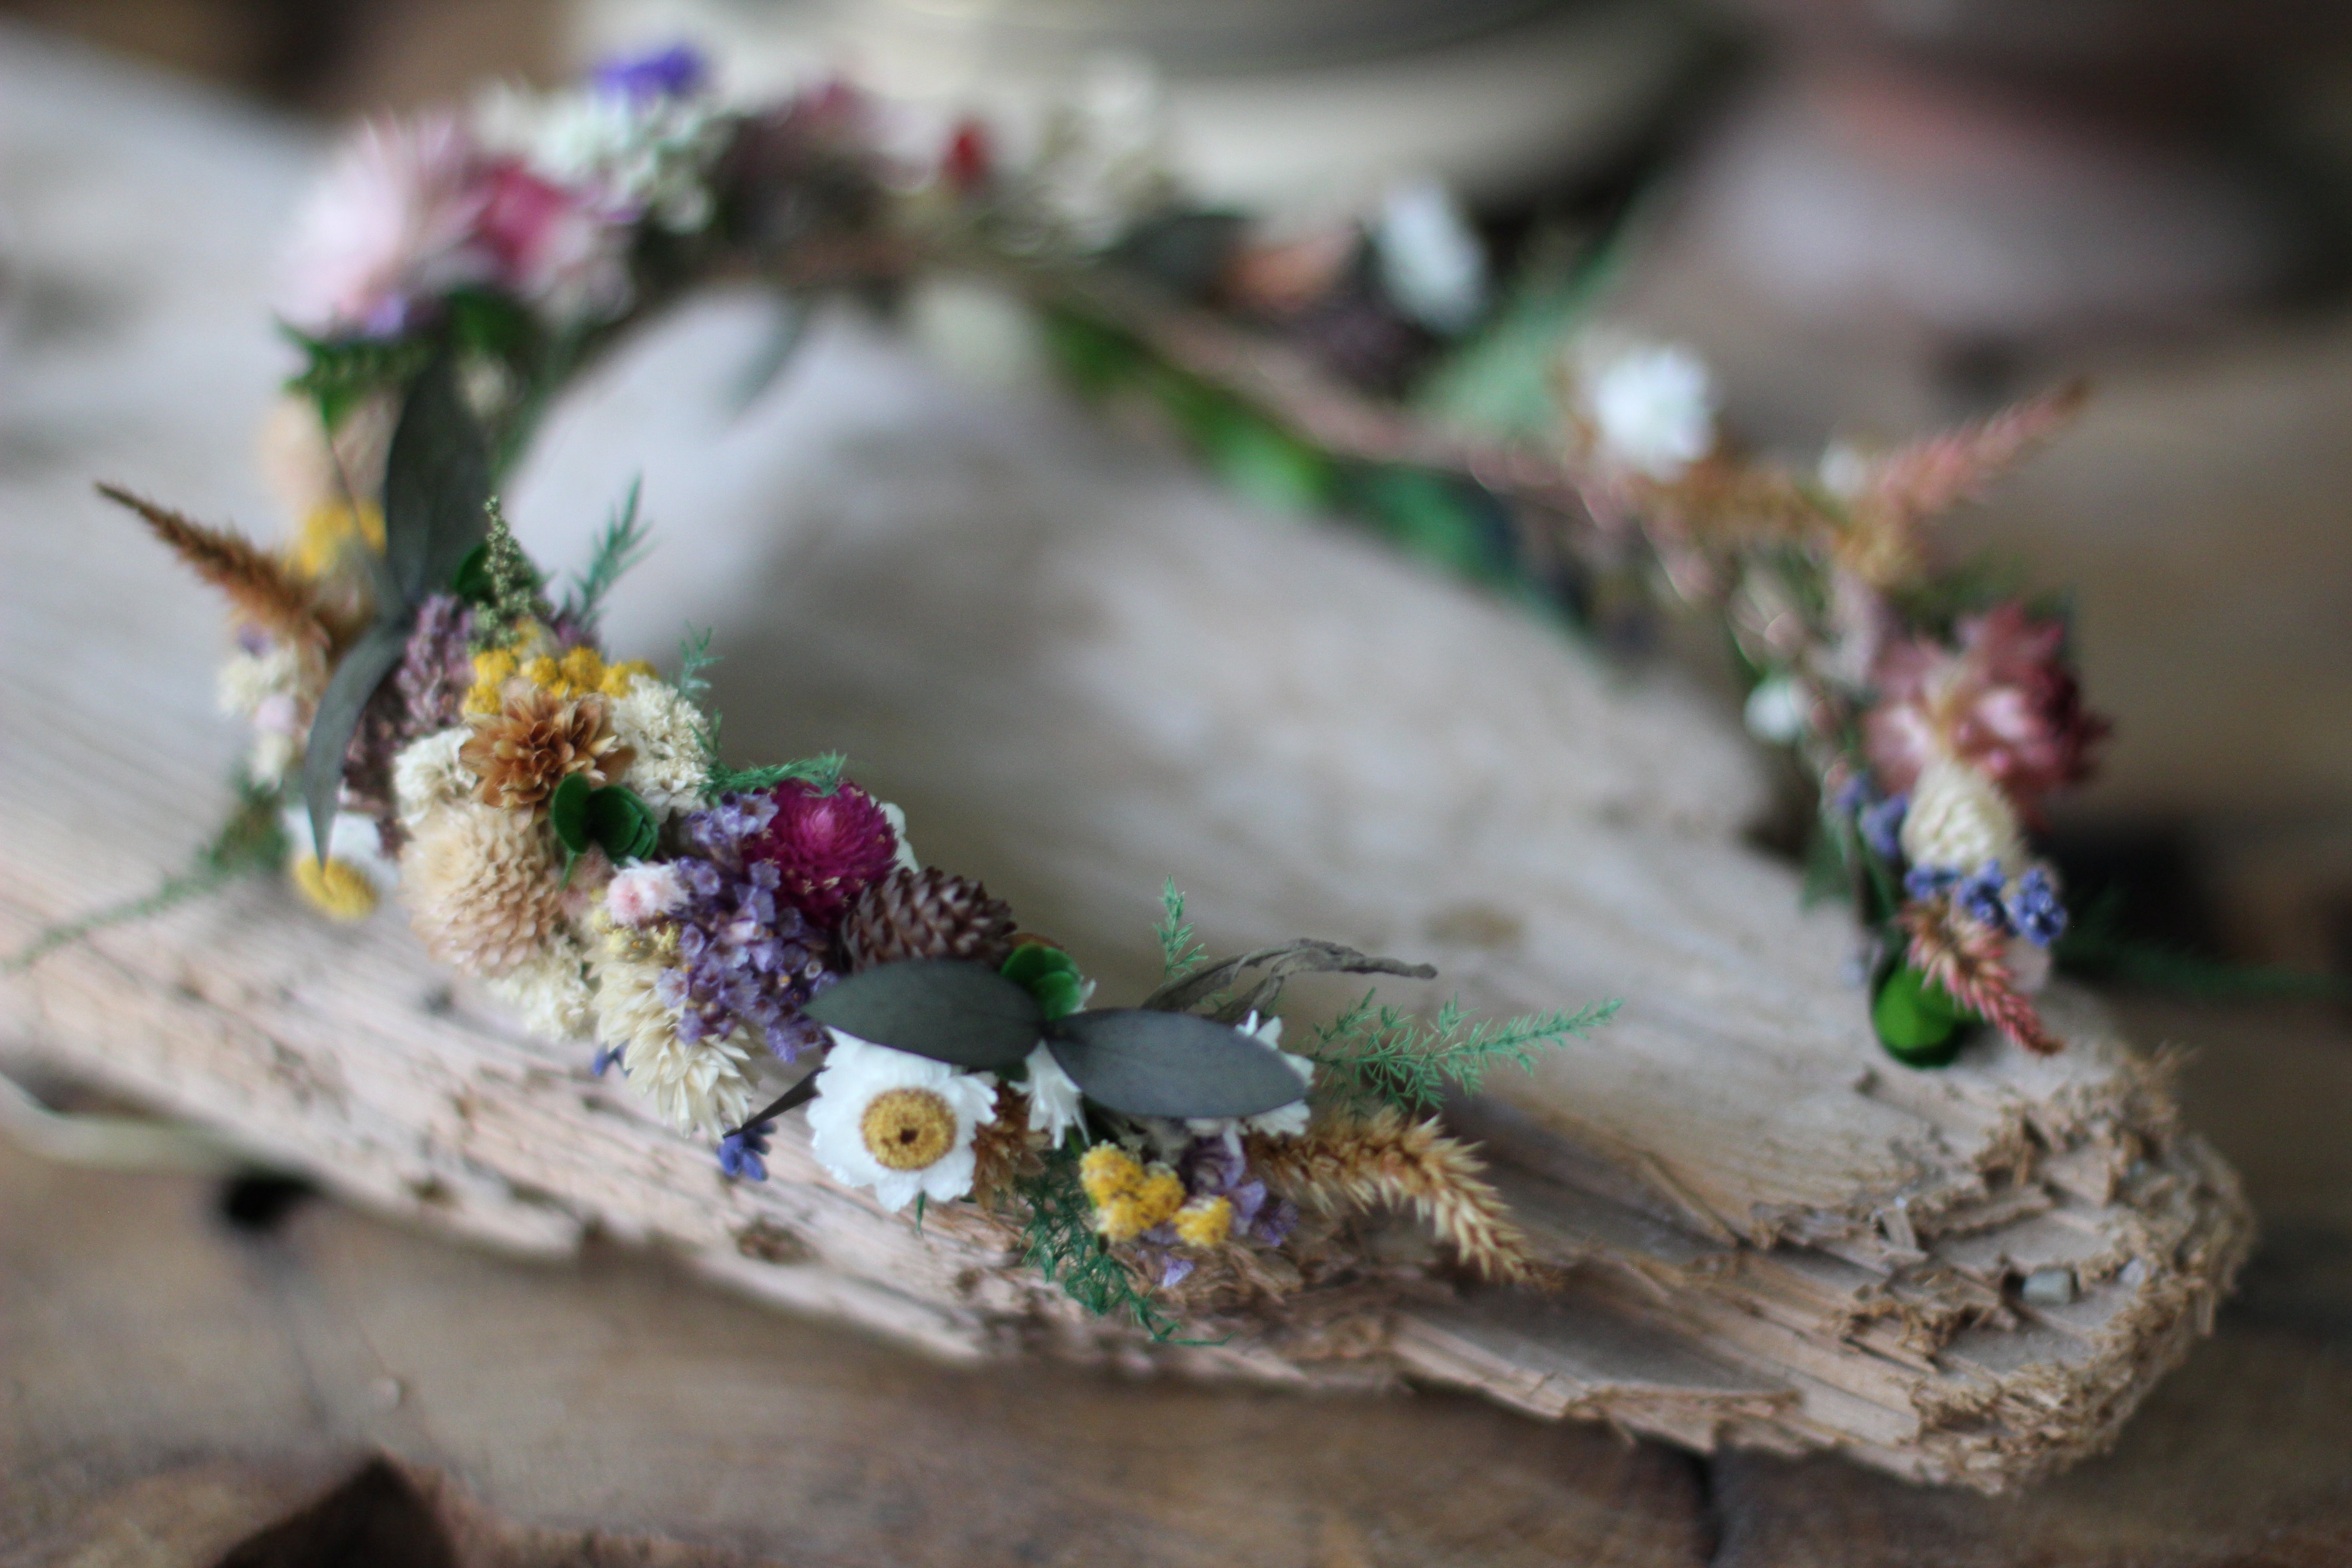 Preorder * Dried Flowers Goddess Crown